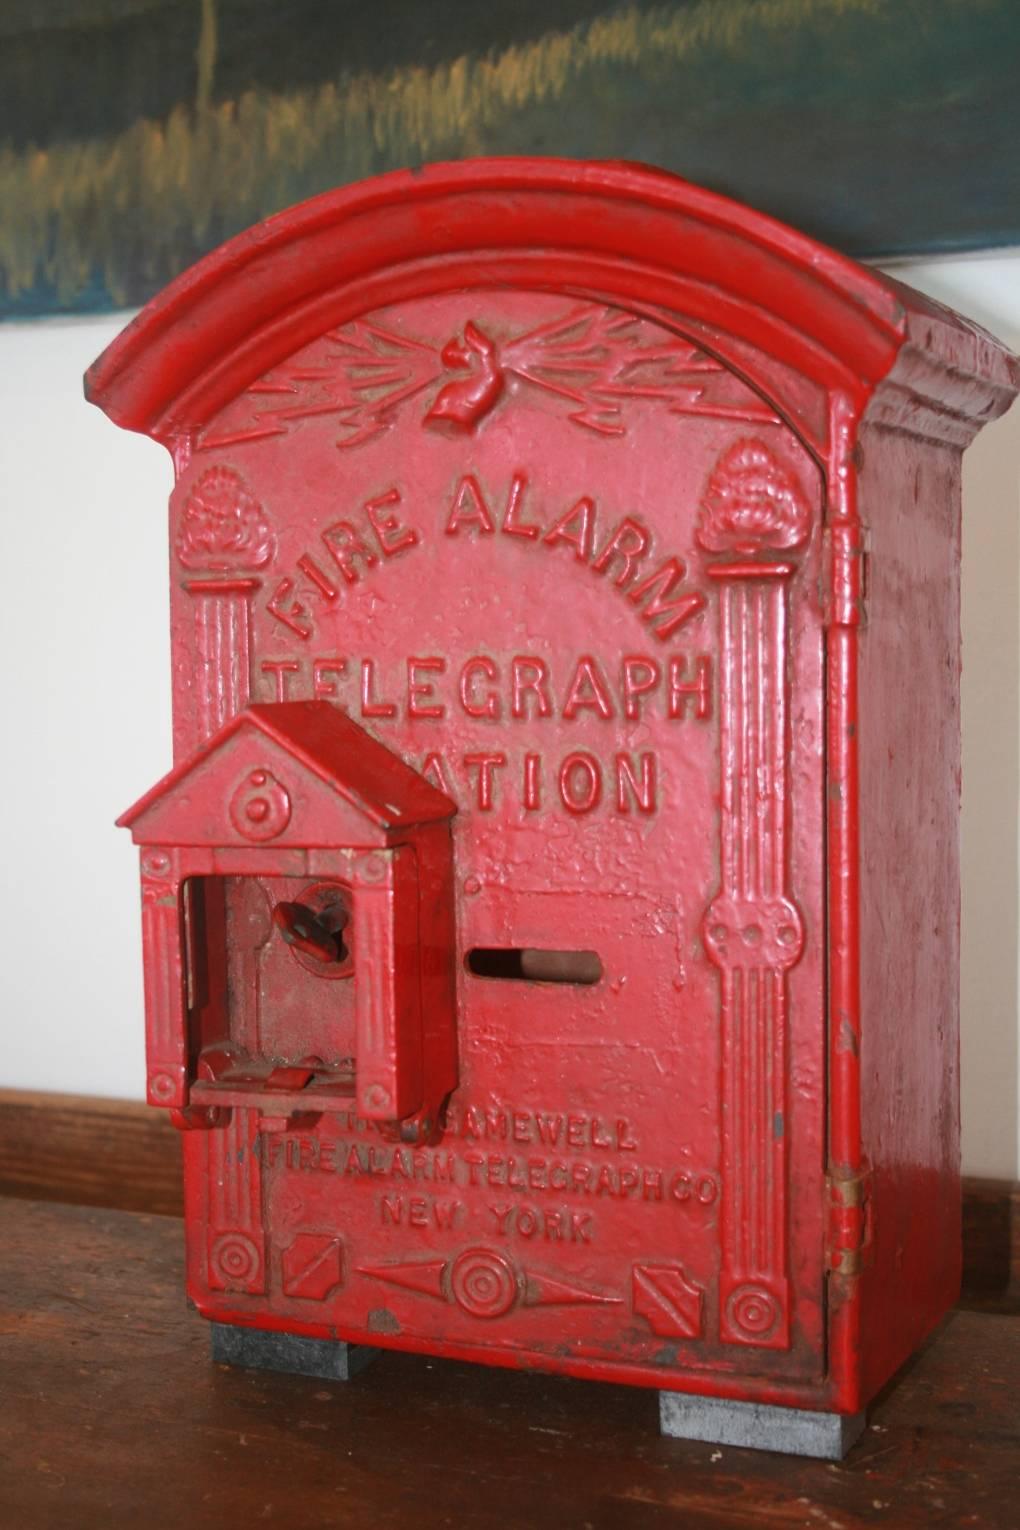 Iconic New York red painted electric fire alarm box. Great for a collector of interesting vintage New York City memorabilia it's also just simply a beautiful object. The hand hold the lightning bolts is a great image. This particular fire alarm box